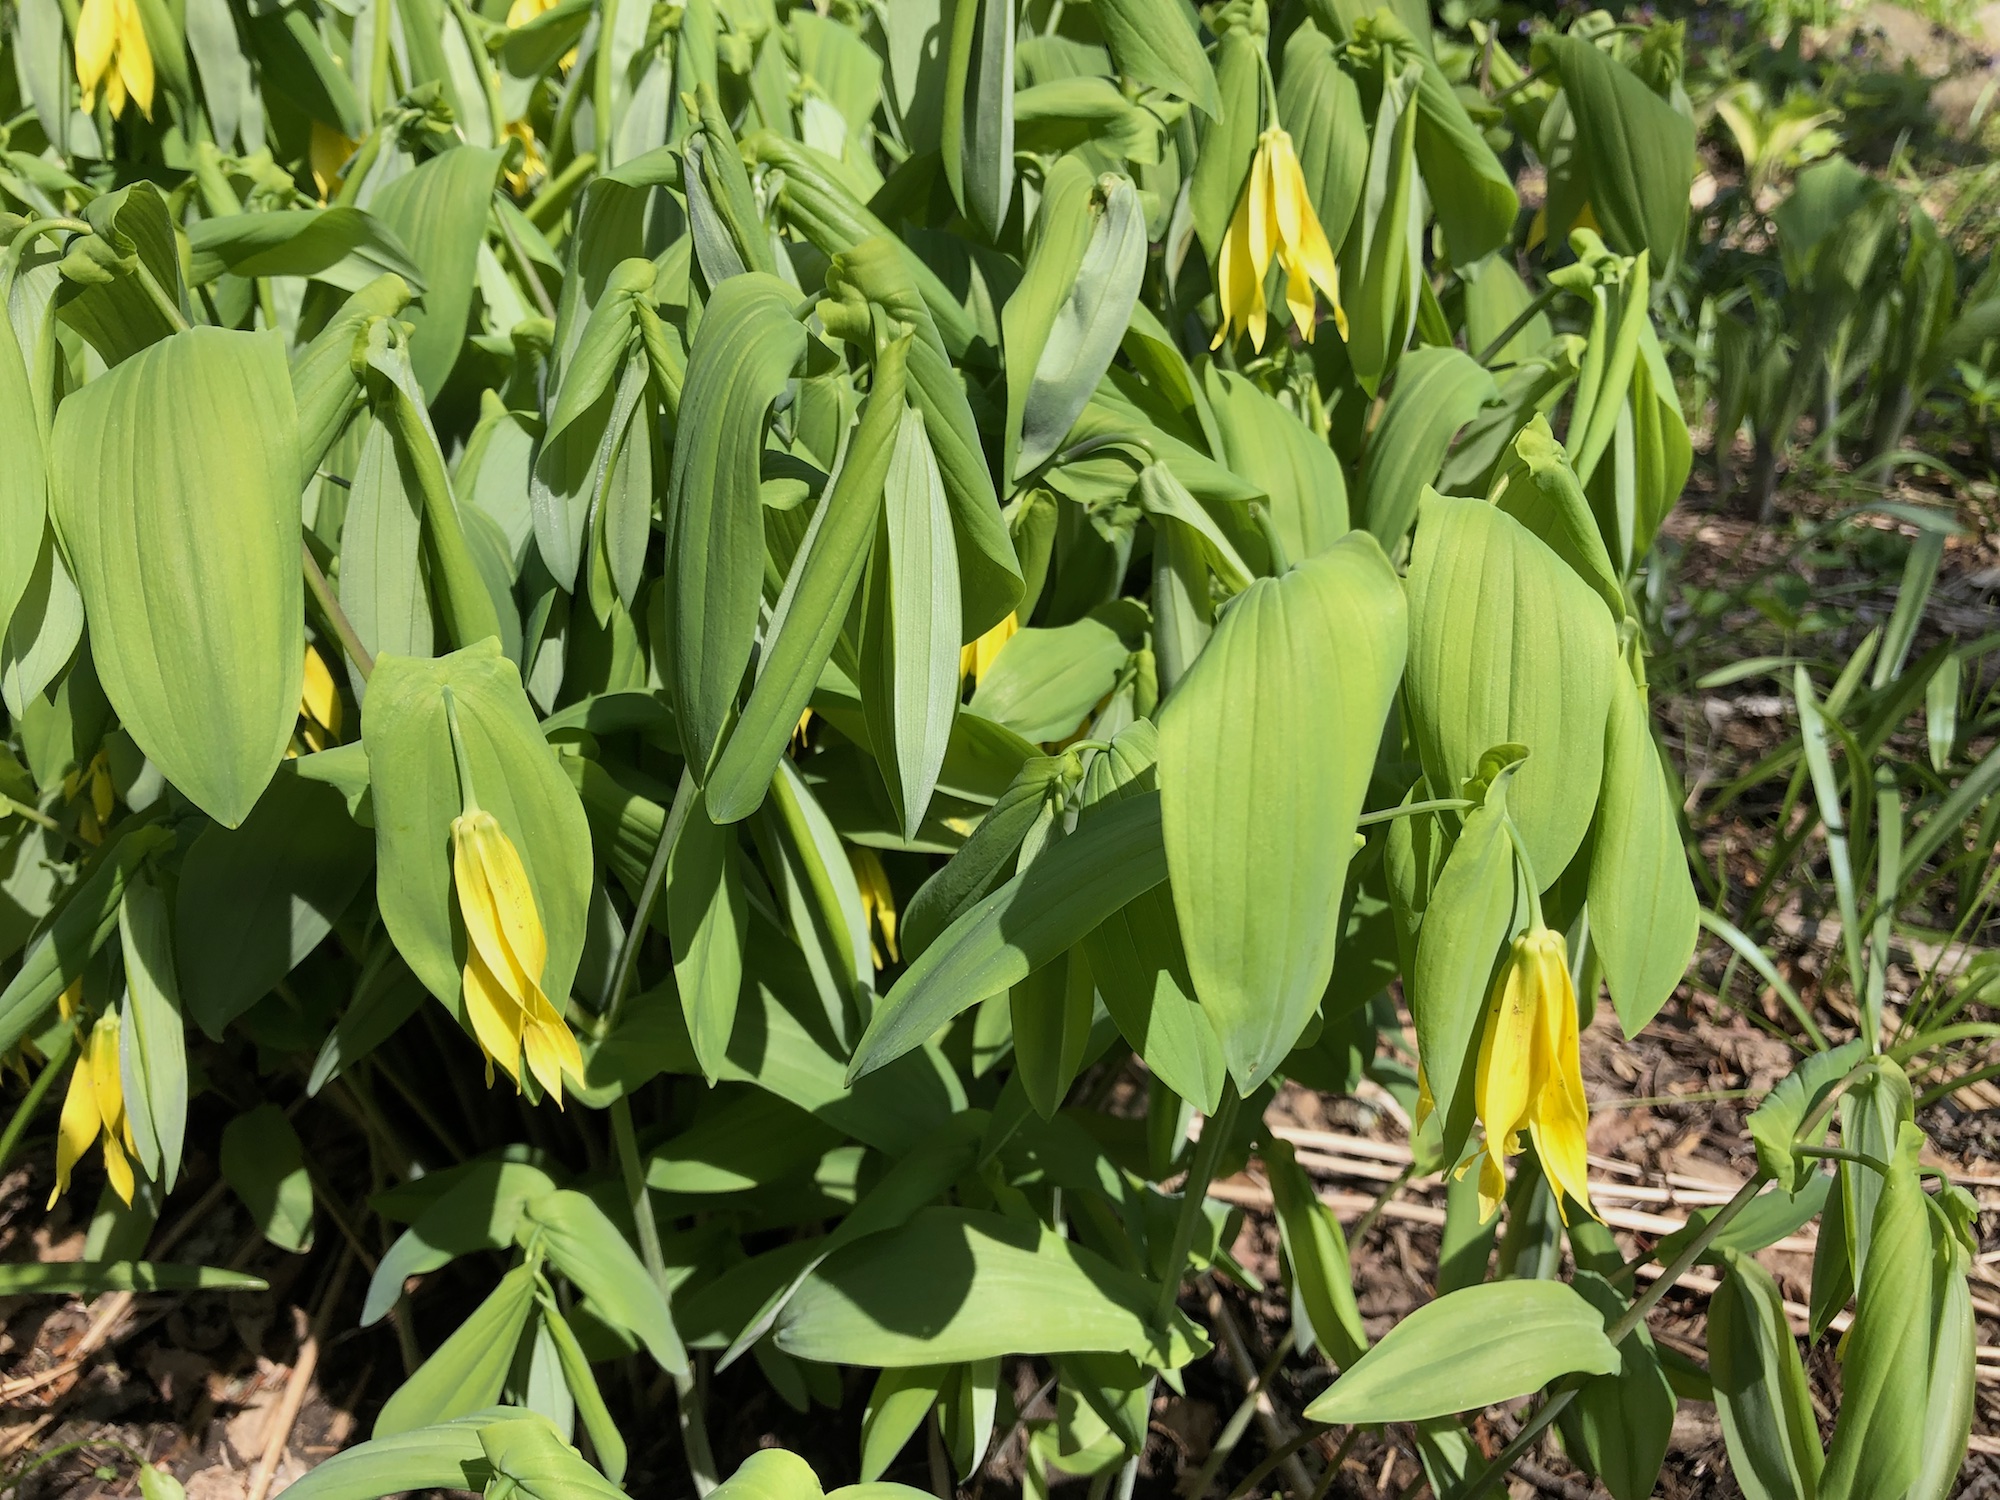 Bellwort in Madison, Wisconsin on May 5, 2019.